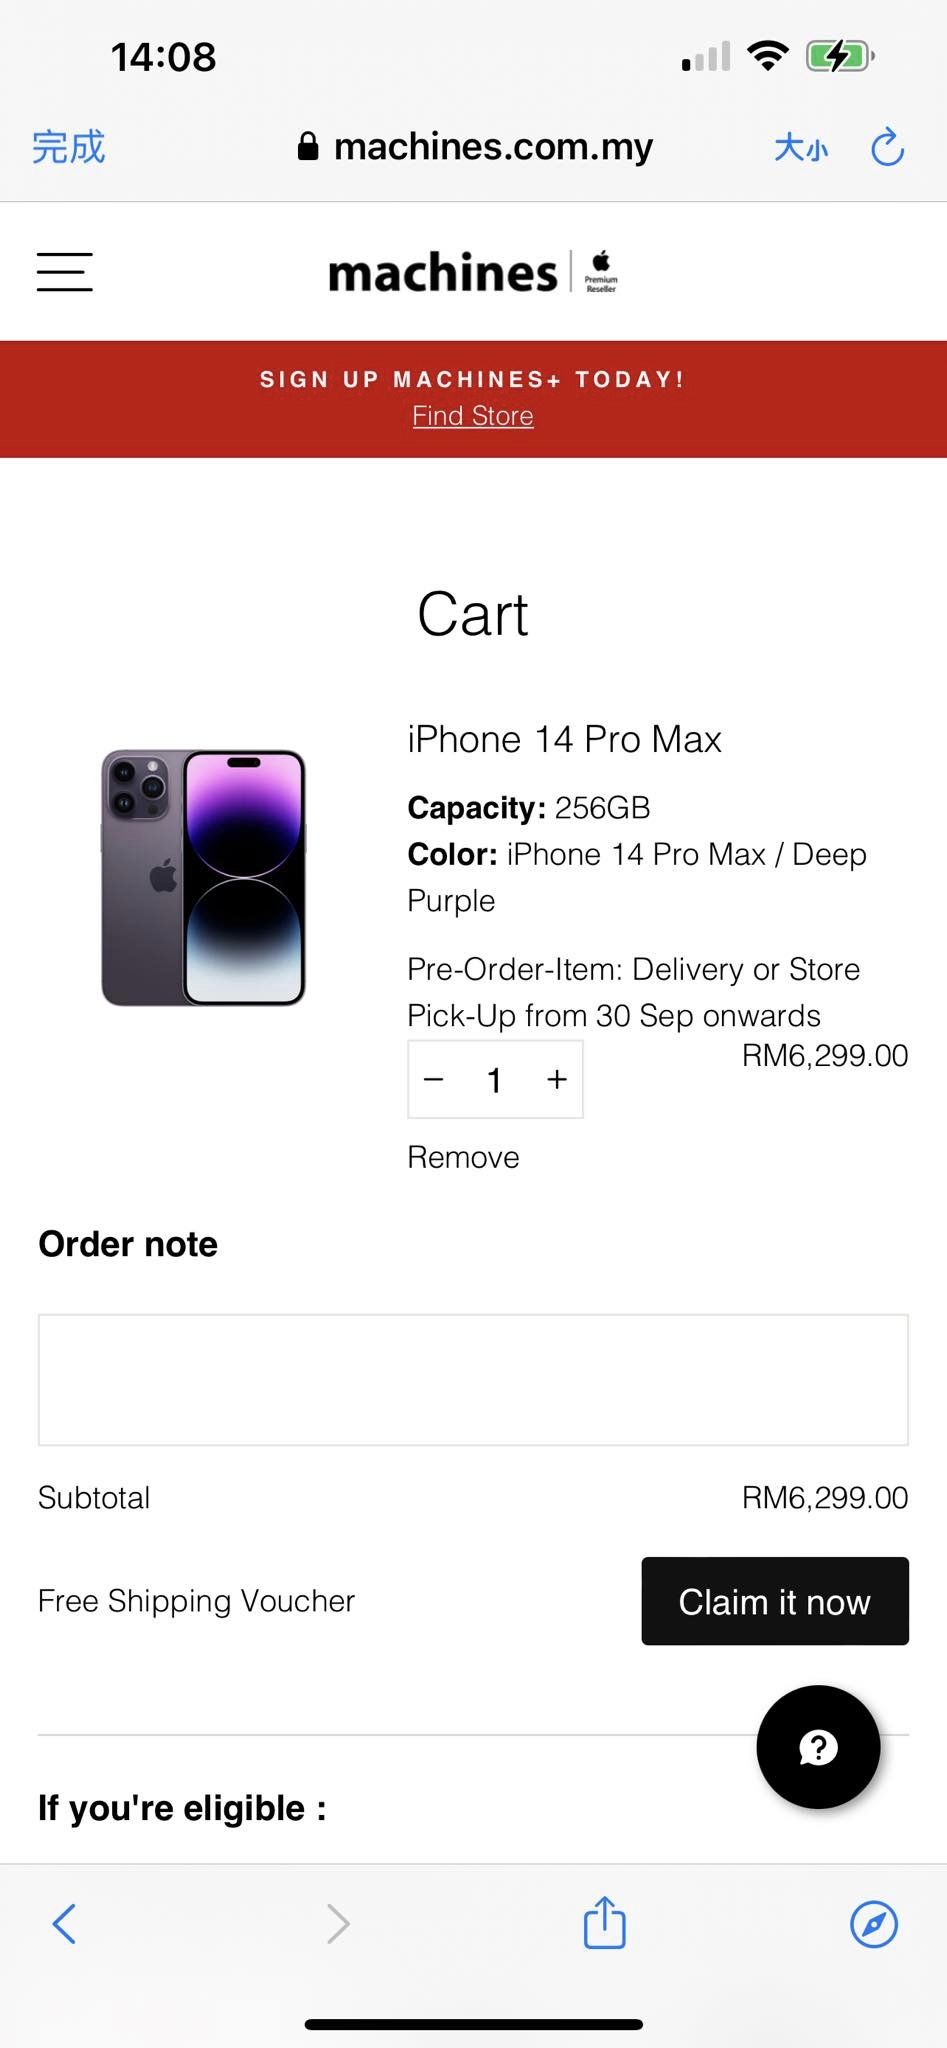 A local netizen shows how he managed to save on buying a new iPhone 14 Pro Max. Image credit: 黄志耀